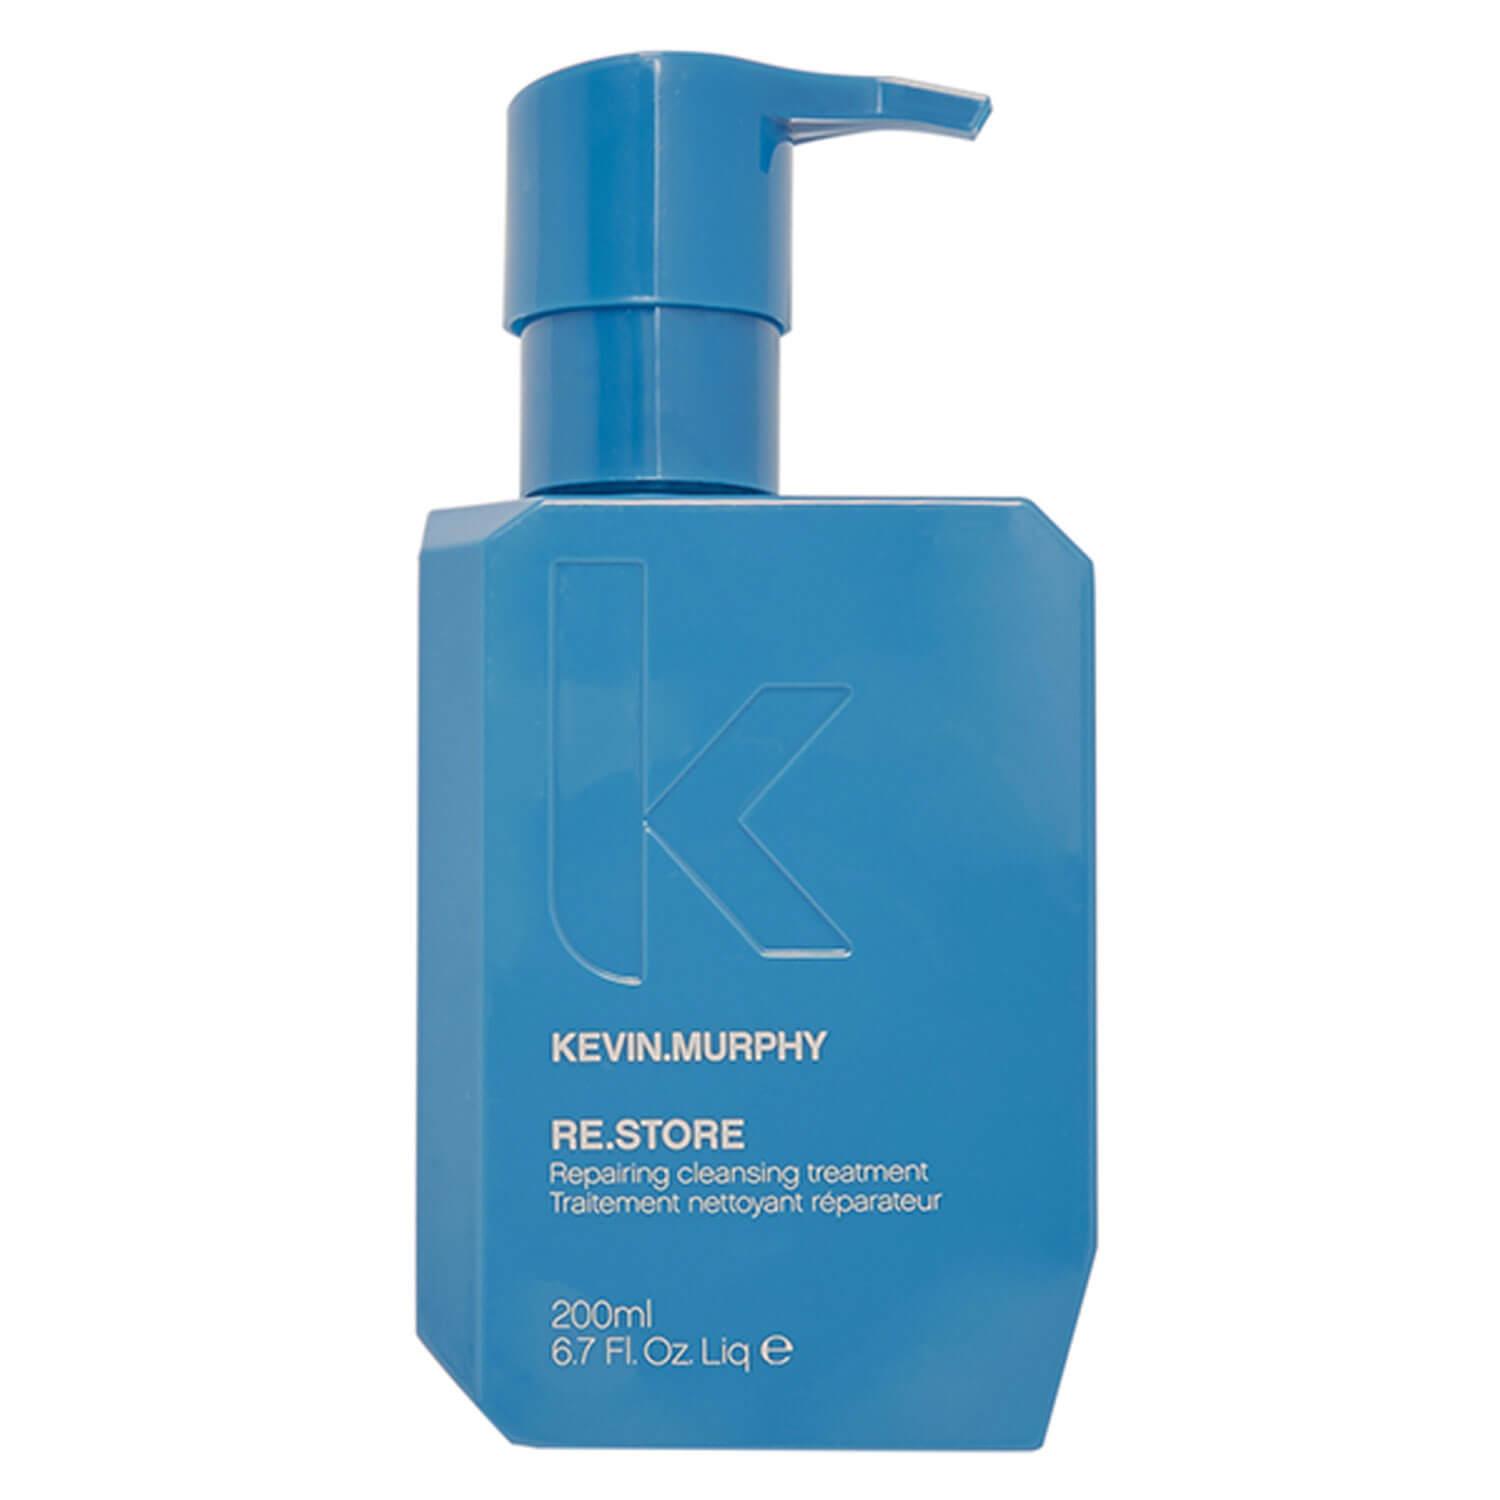 Re.Store - Cleansing Treatment